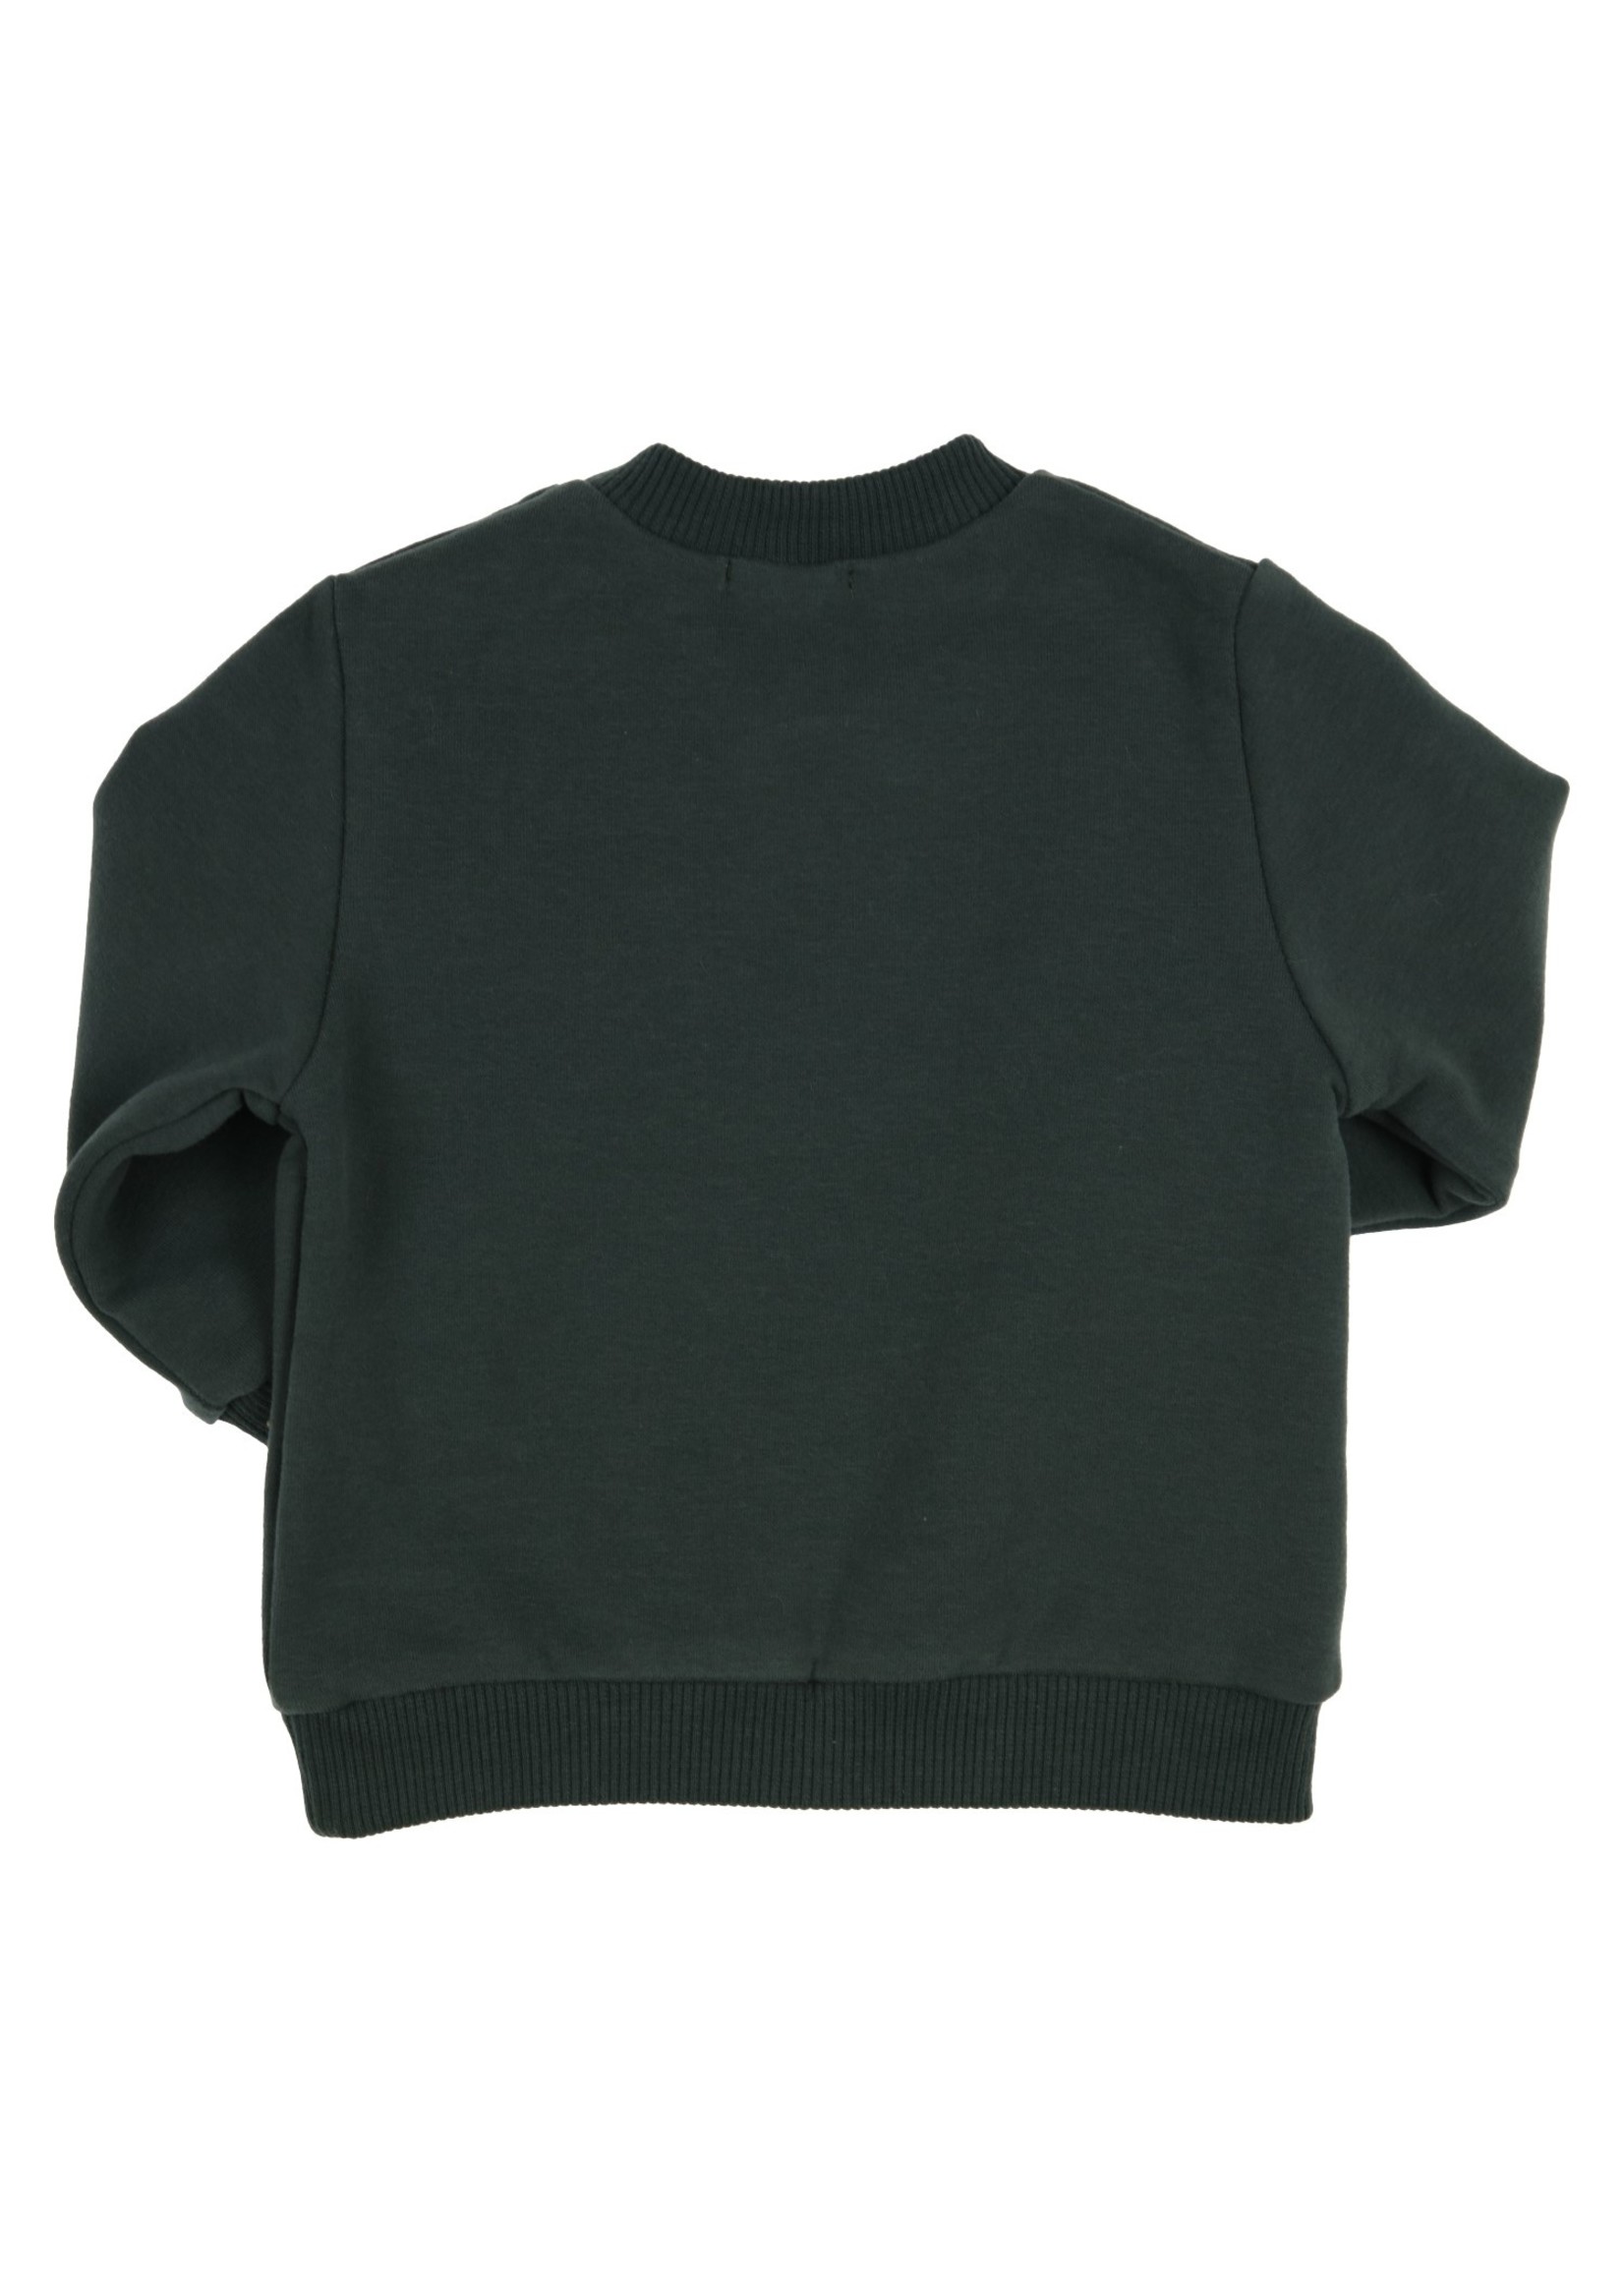 Gymp Sweater Carbondoux - Wanted Green